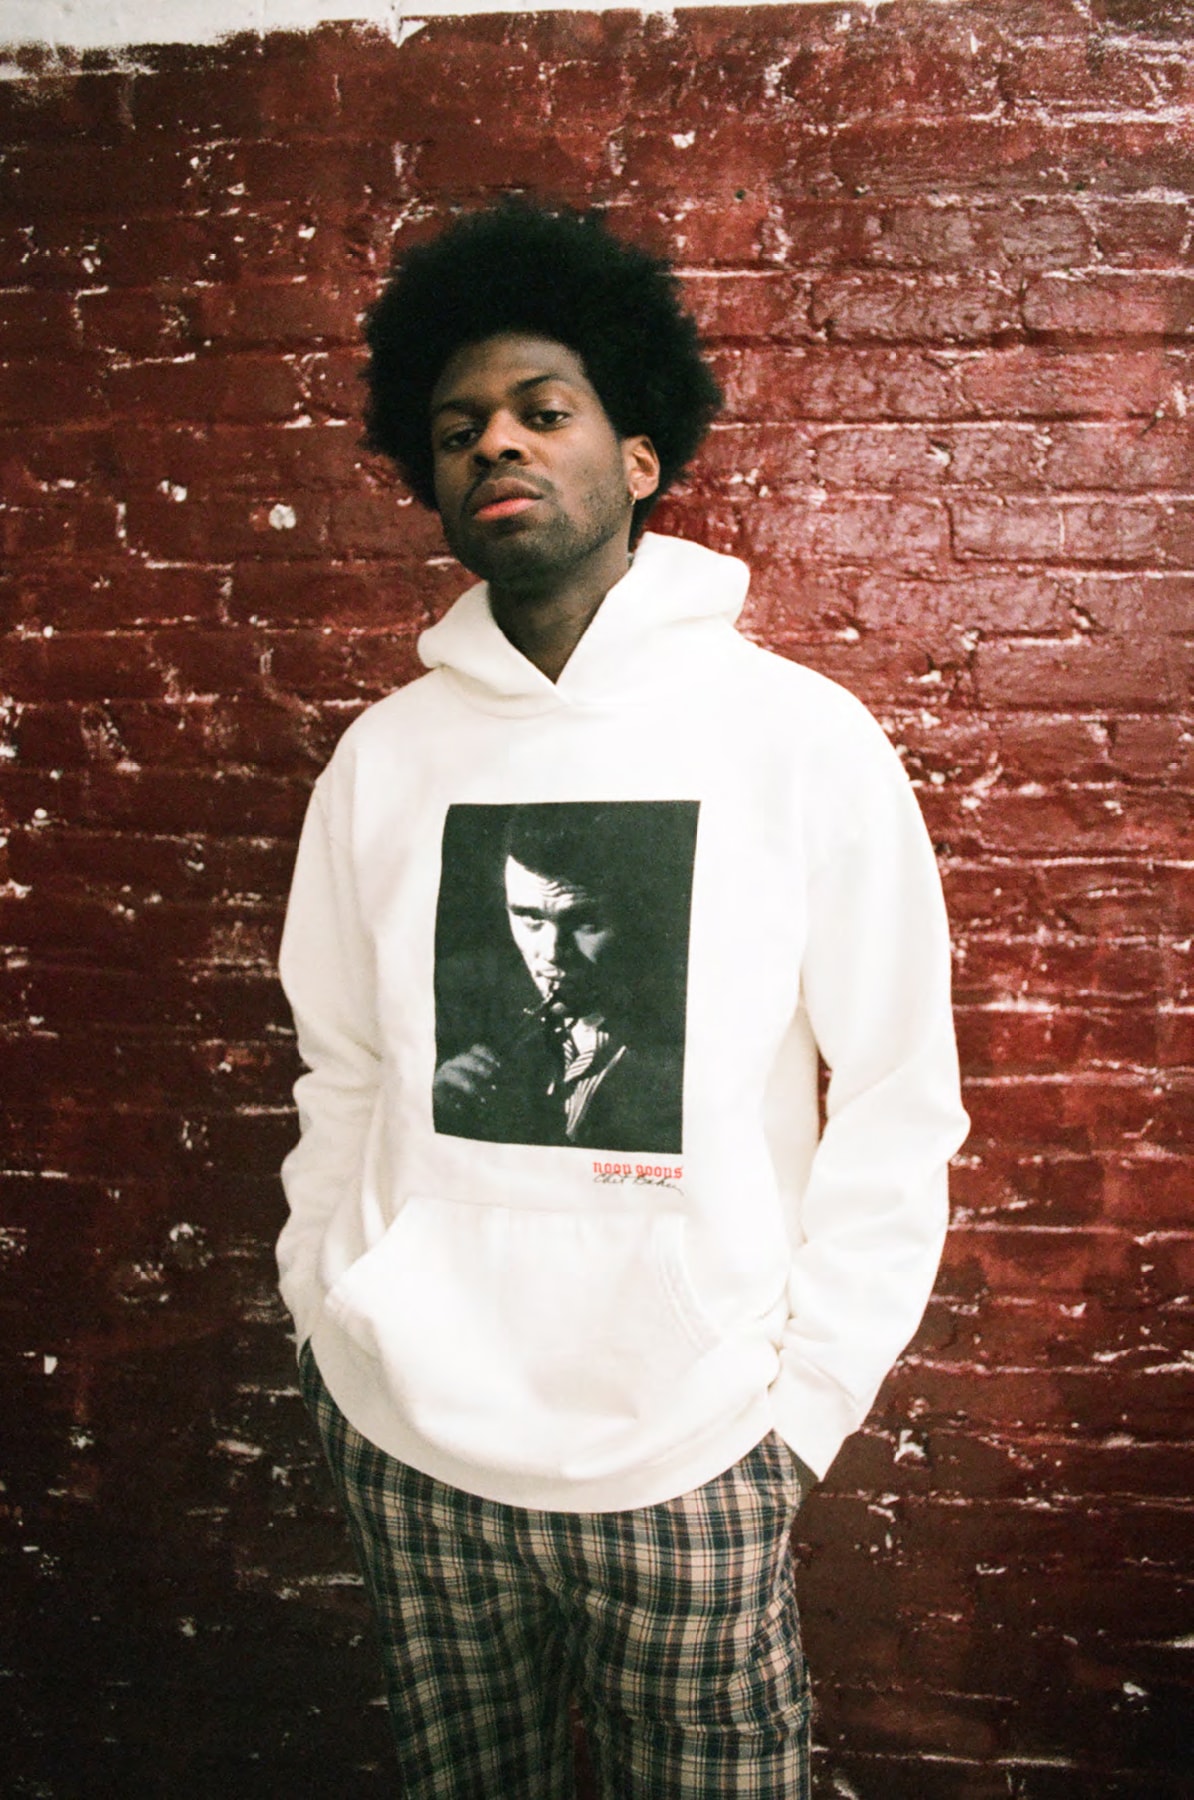 Noon Goons Chet Baker Capsule Collection lookbook release info shirts hoodies pins hats